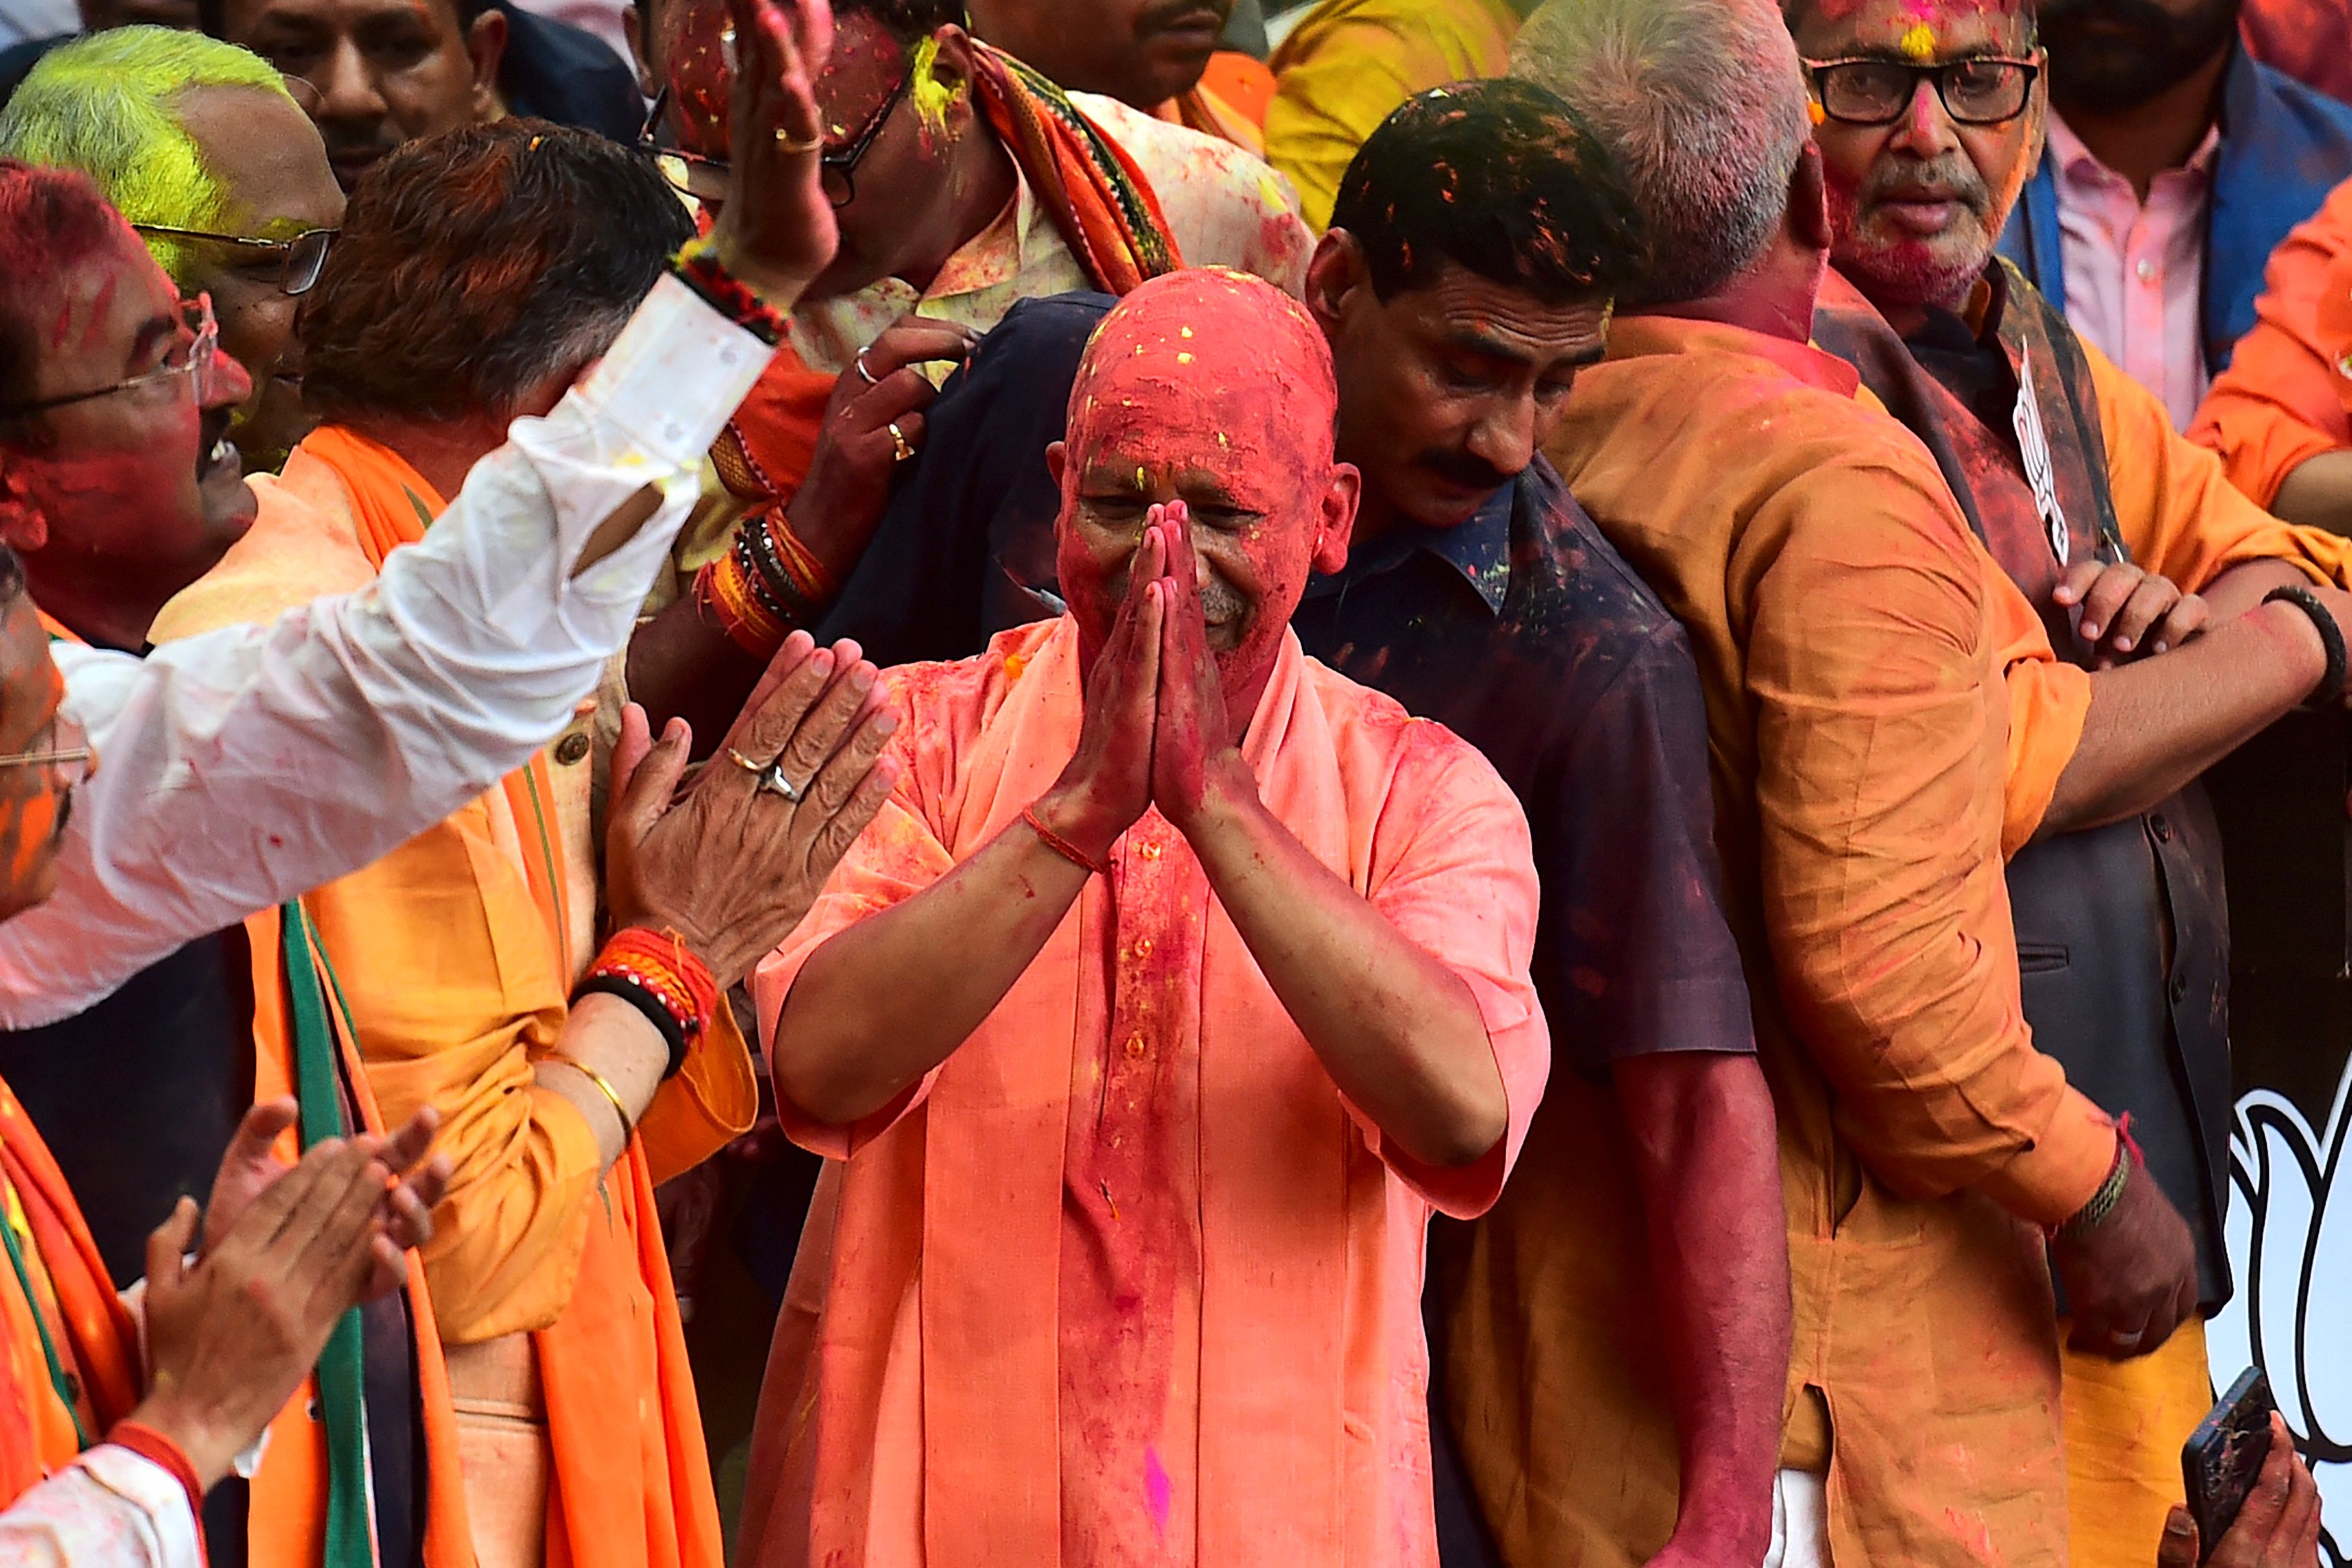 File image: The directive came from chief minister Yogi Adityanath, a hardline saffron-clad Hindu monk known for his hate speech against Muslims